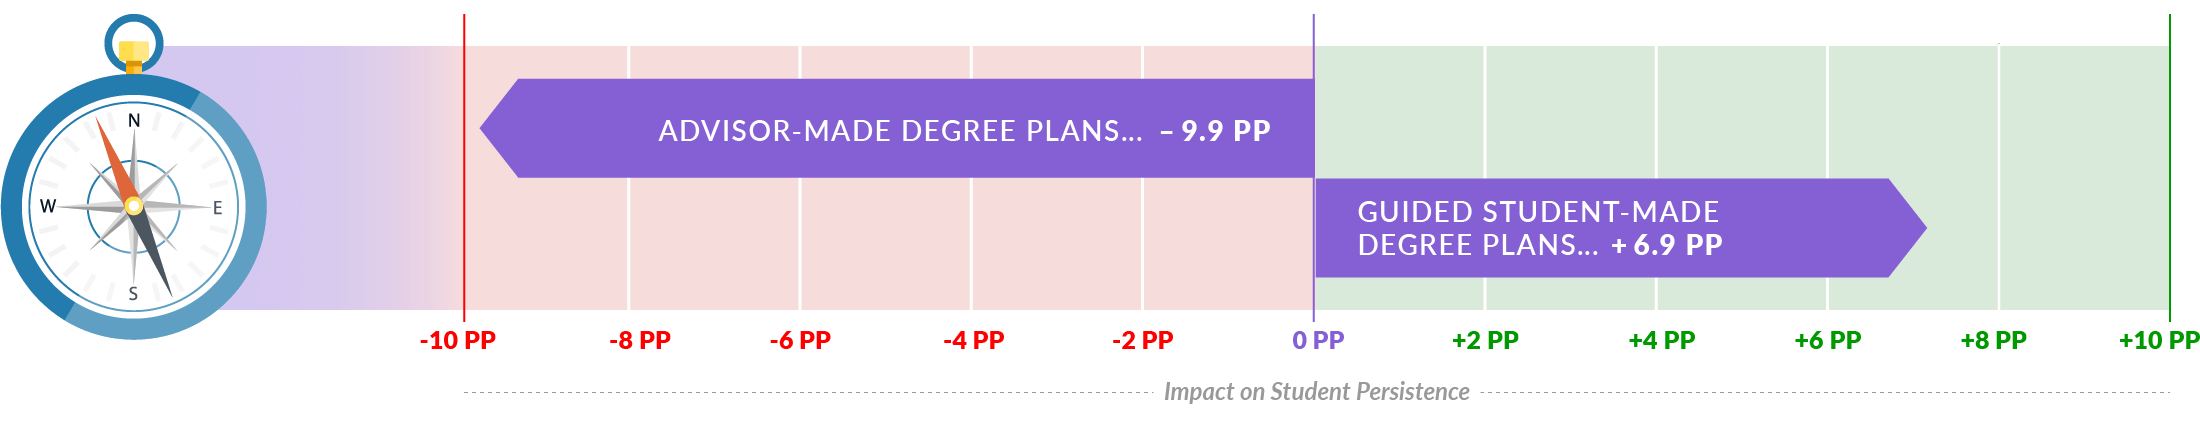 civitas illustration showing a comparison between advisor degree plans and guided student degree plans